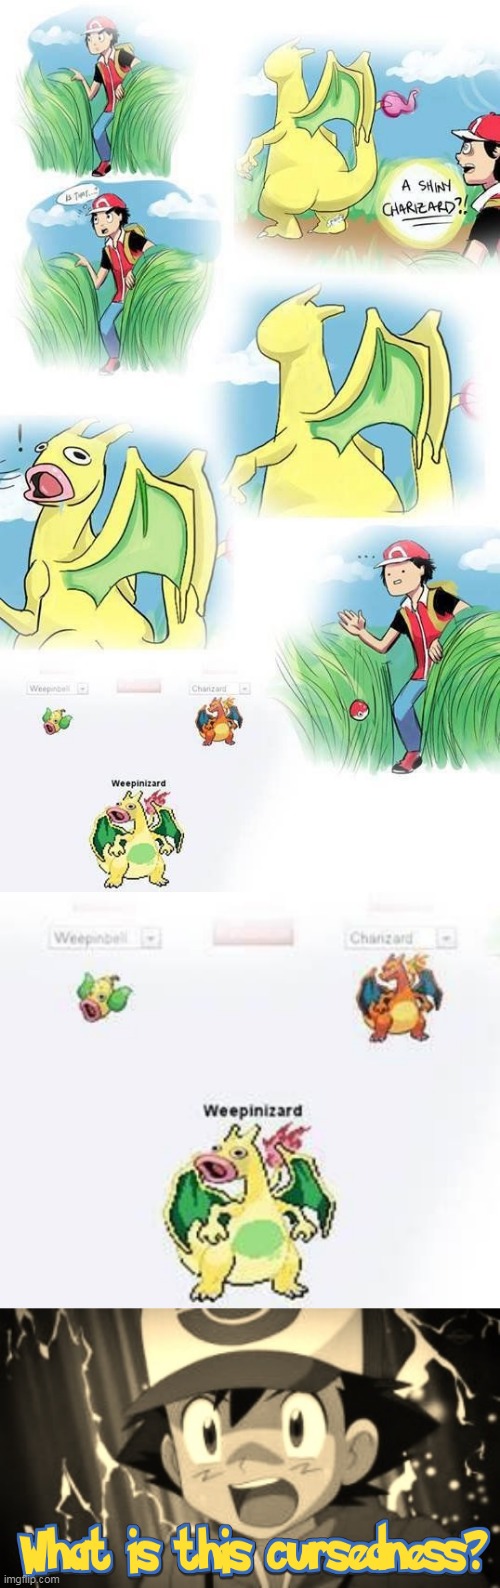 CURSEDNESS AT IT'S BEST | image tagged in pokemon,pokemon memes,ash ketchum,cursed | made w/ Imgflip meme maker